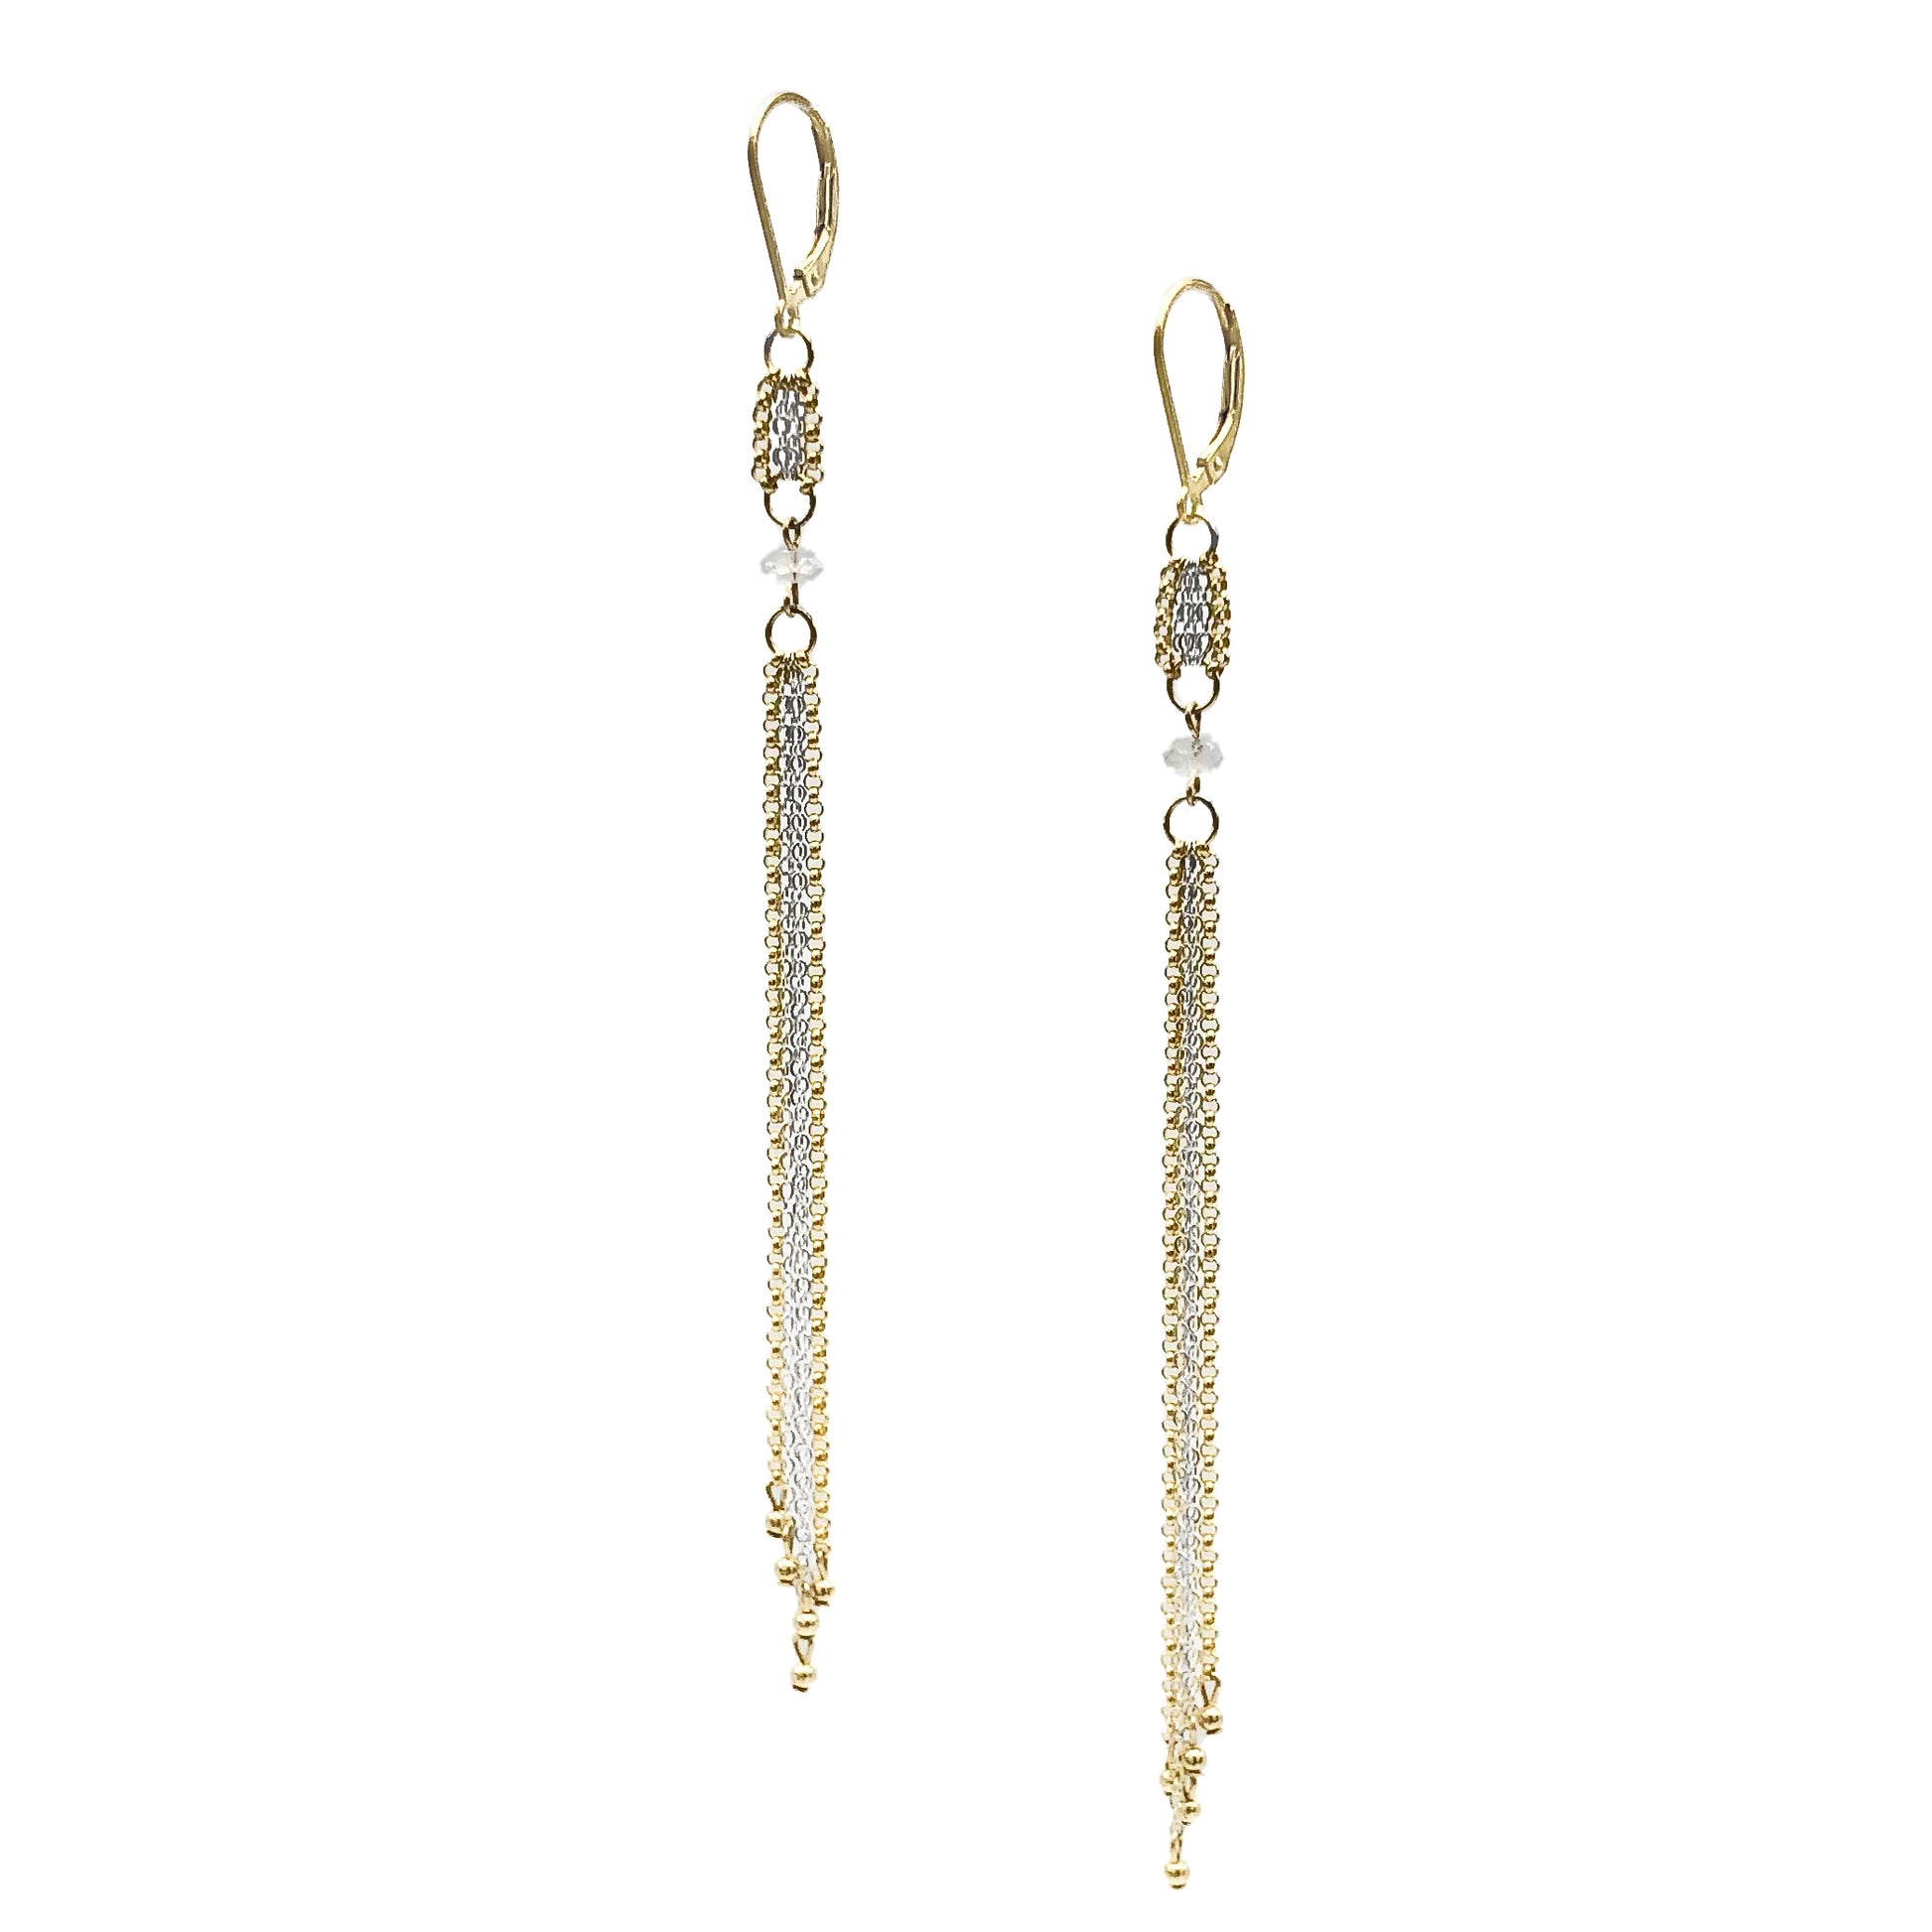 Long Silver + Gold Fringe Duster Earrings with Clear Quartz + Pyrite Accents